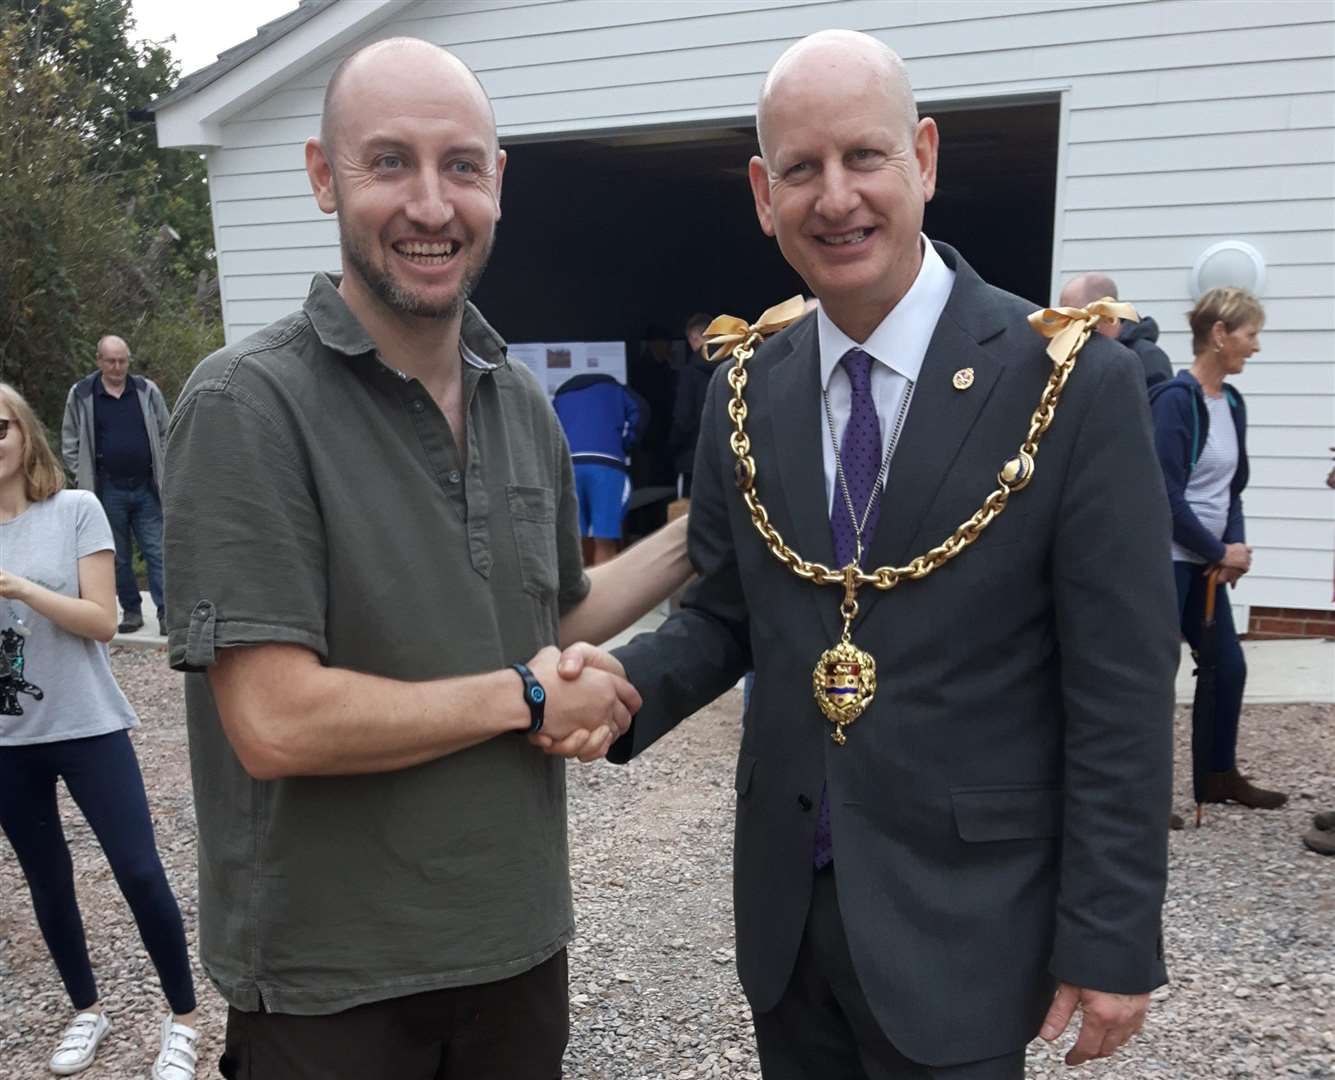 Paul Wilby and the Mayor Dave Naghi at the opening ceremony